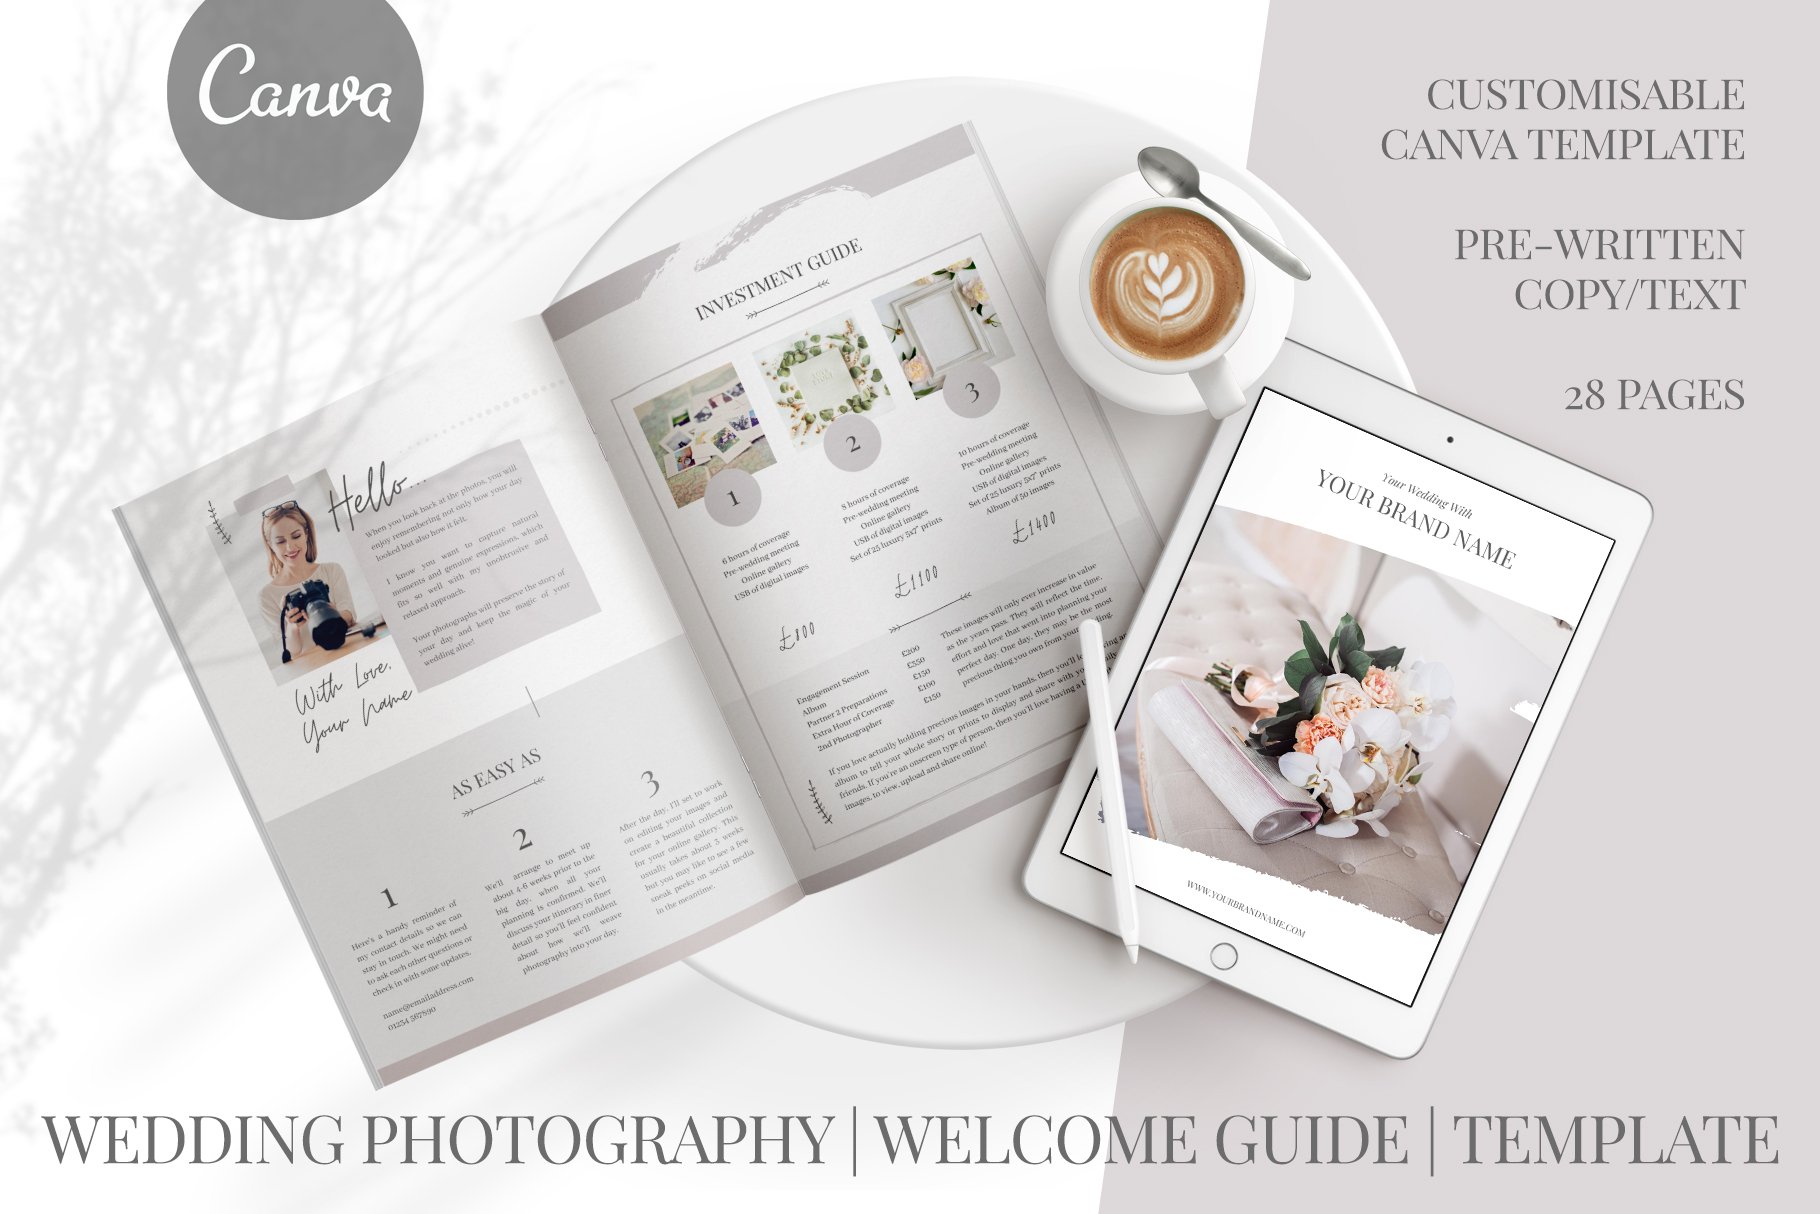 Pre-written Wedding Guide Template cover image.